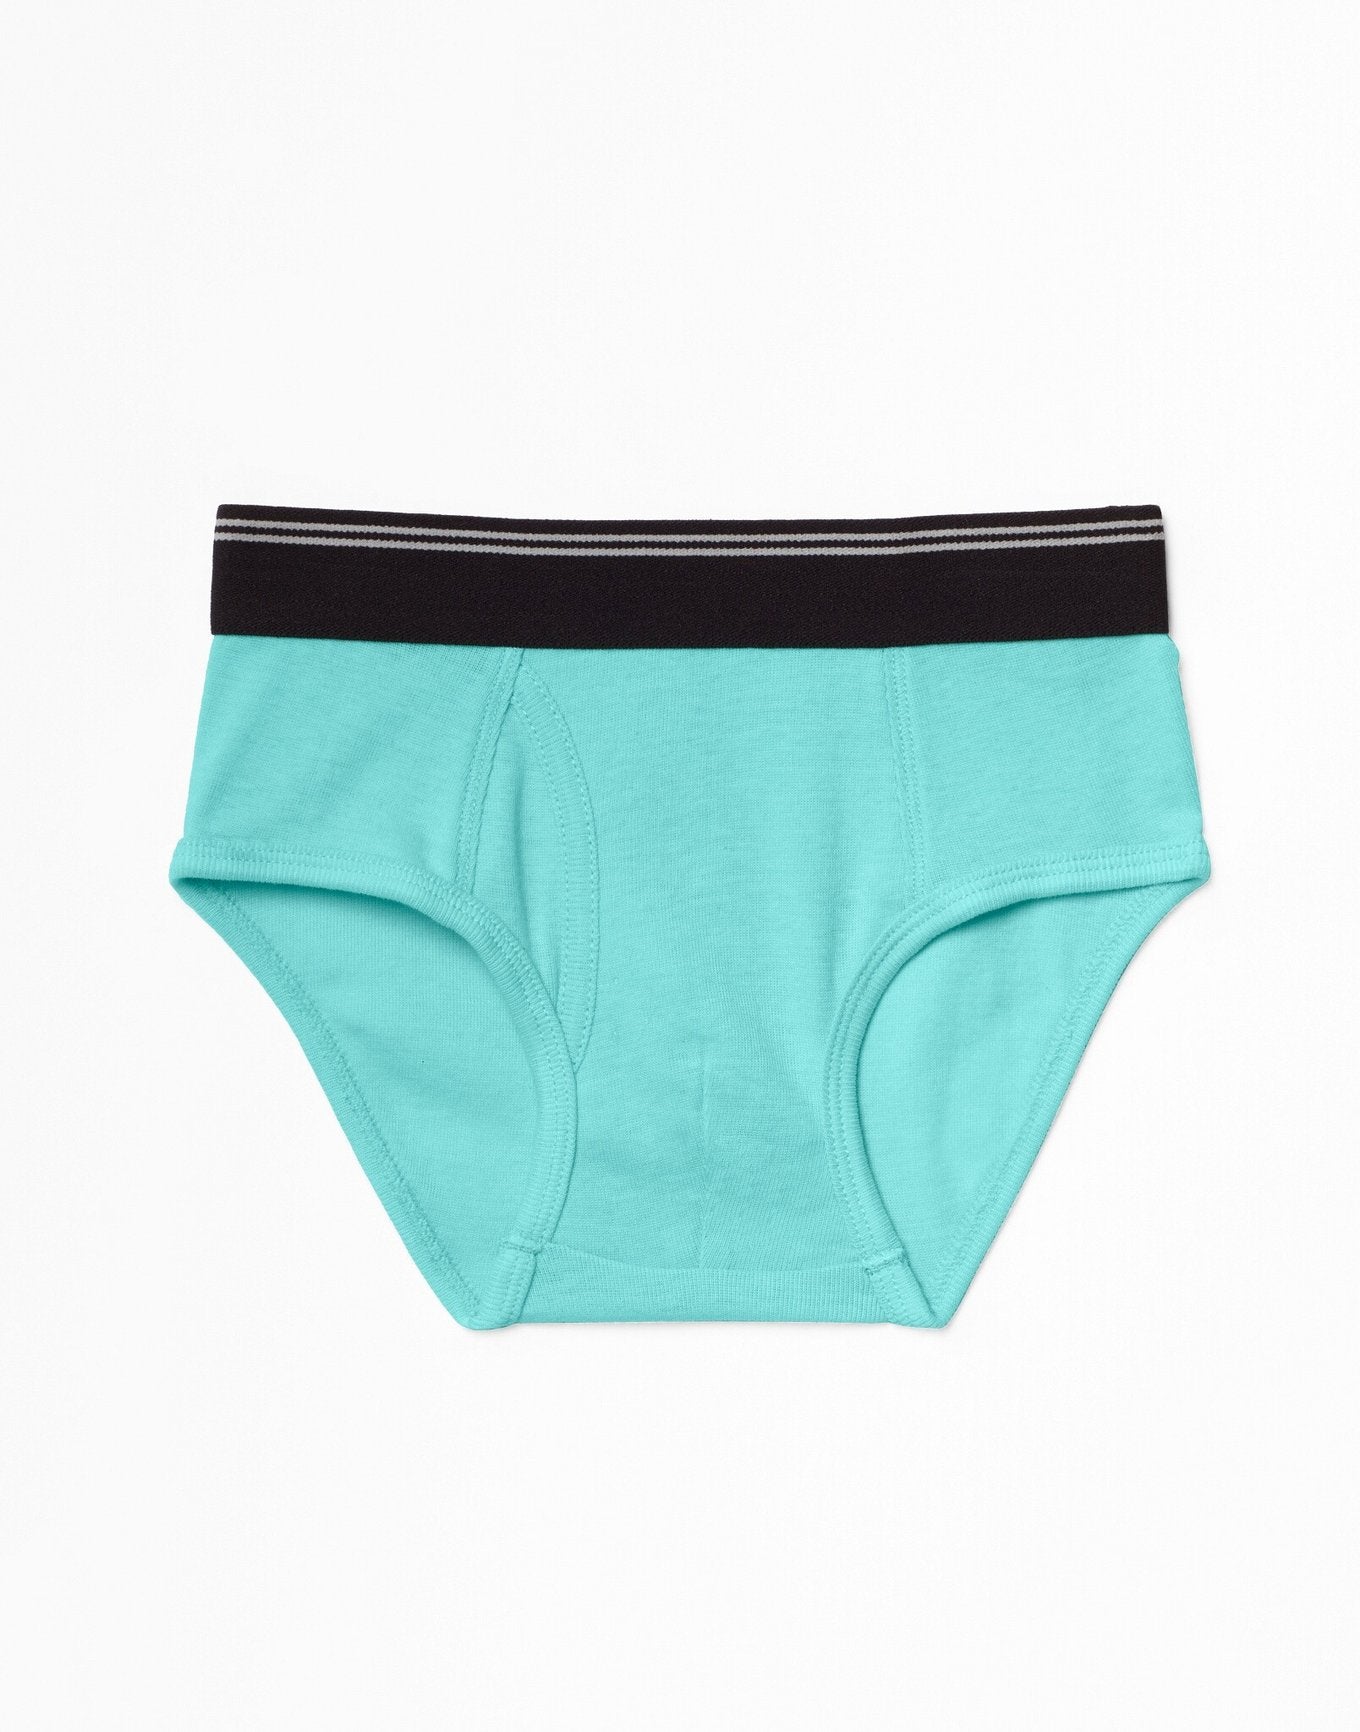 Outlines Kids Lucas in color Blue Tint and shape brief